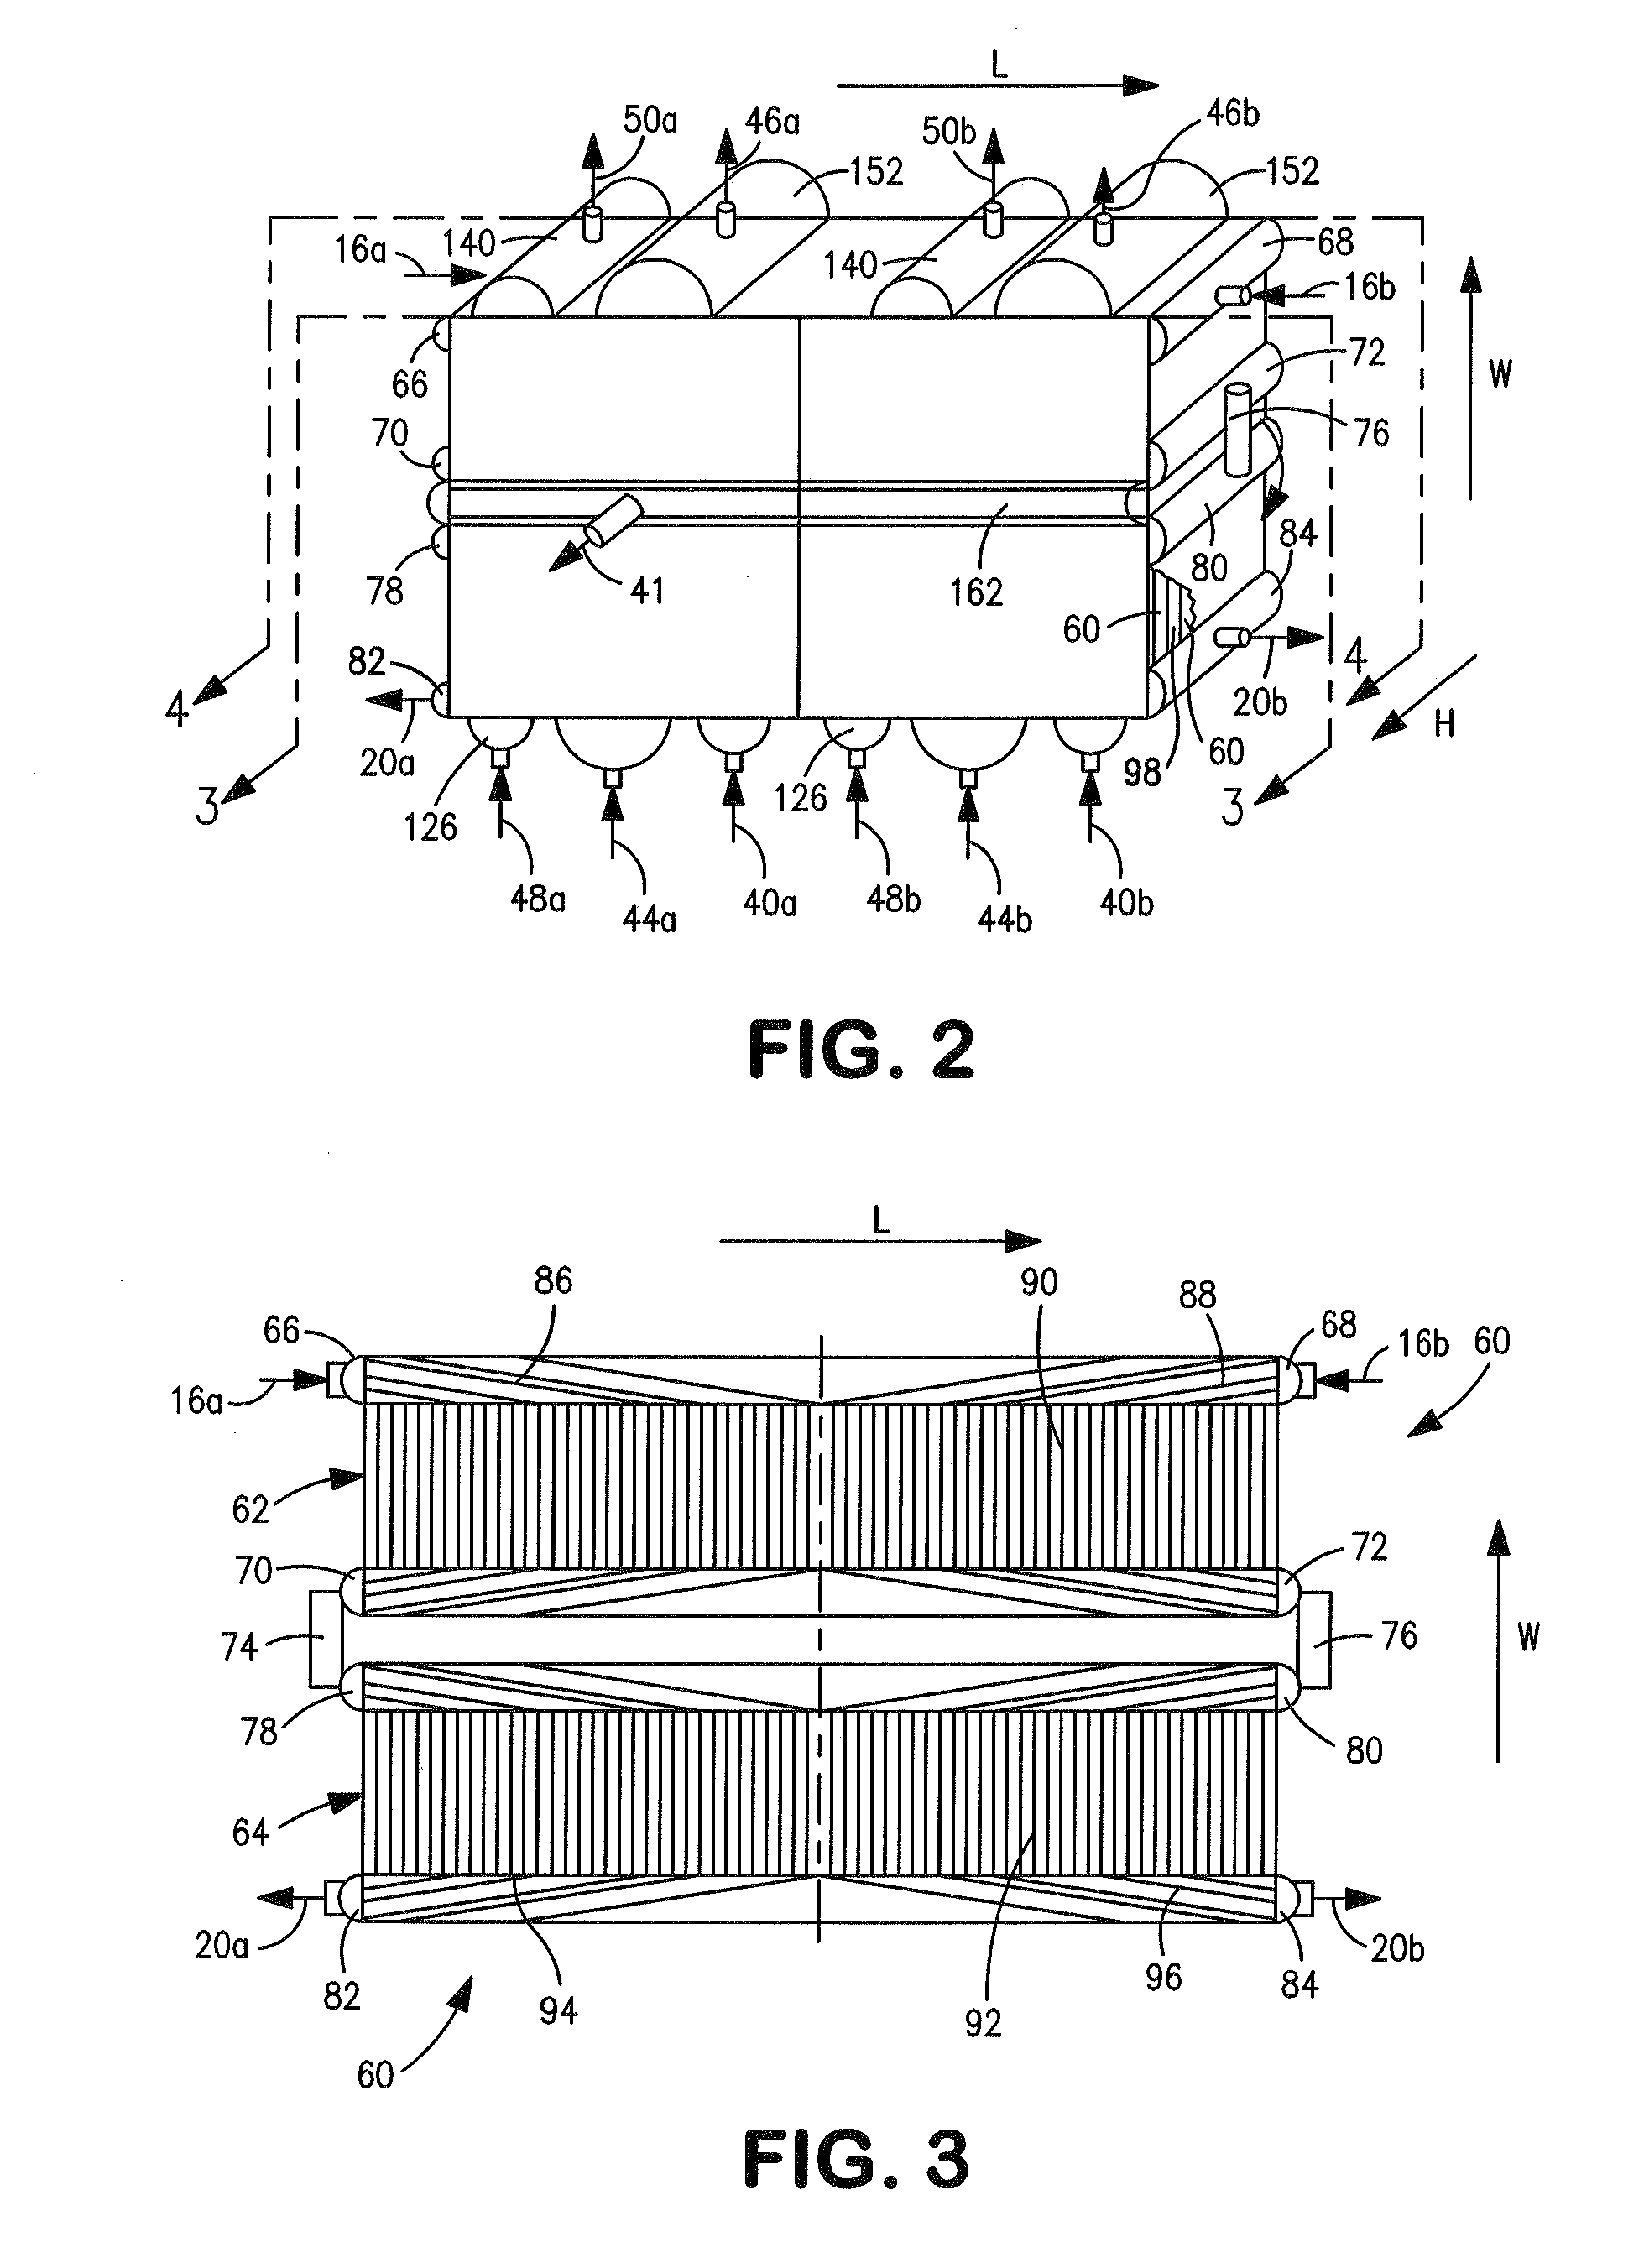 Plate-fin heat exchanger having application to air separation